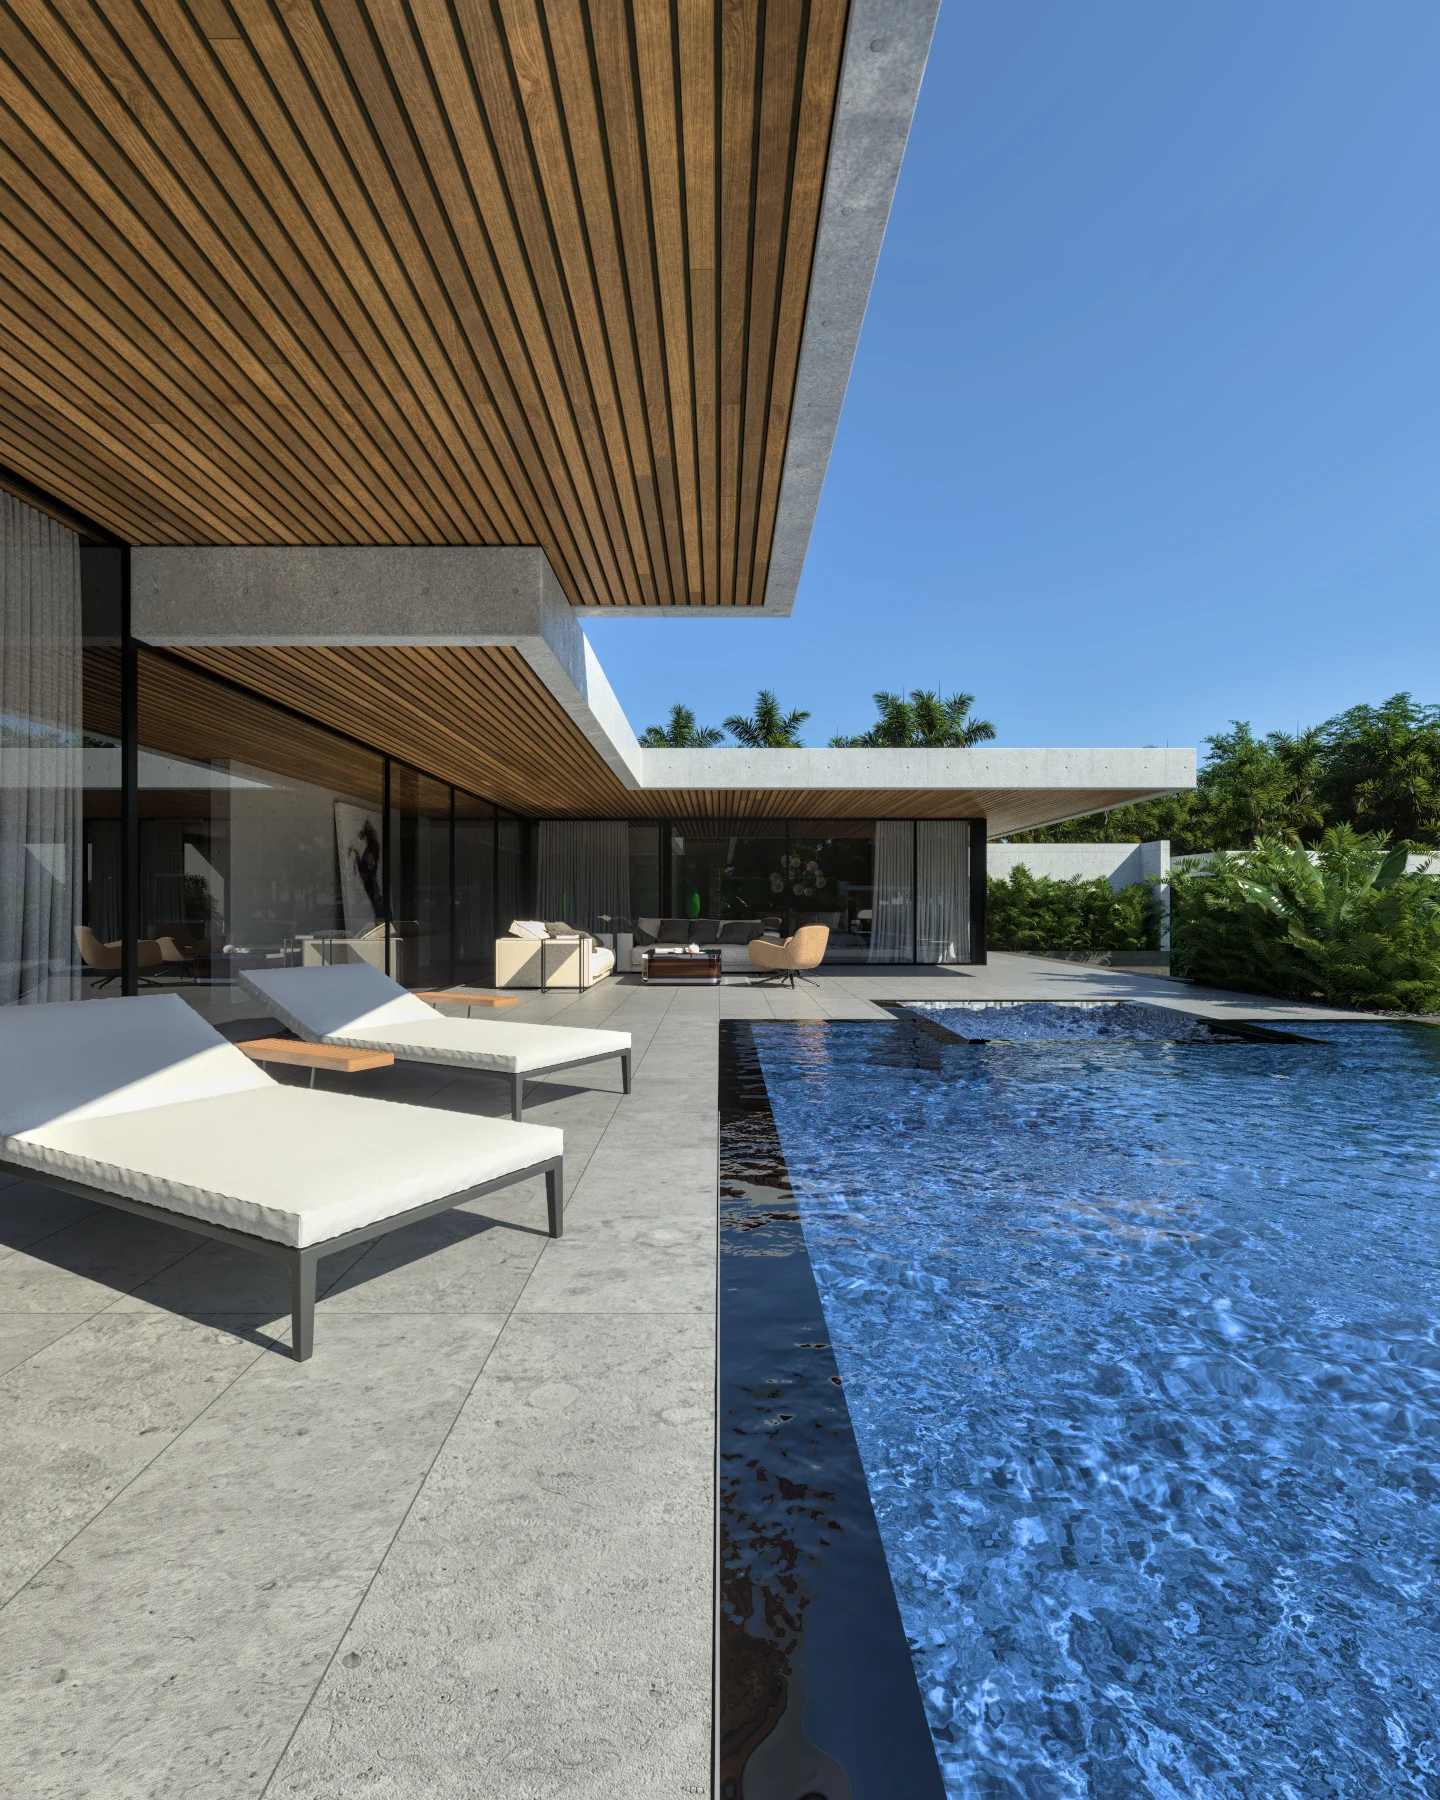 Single story house in Thailand Outdoor pool